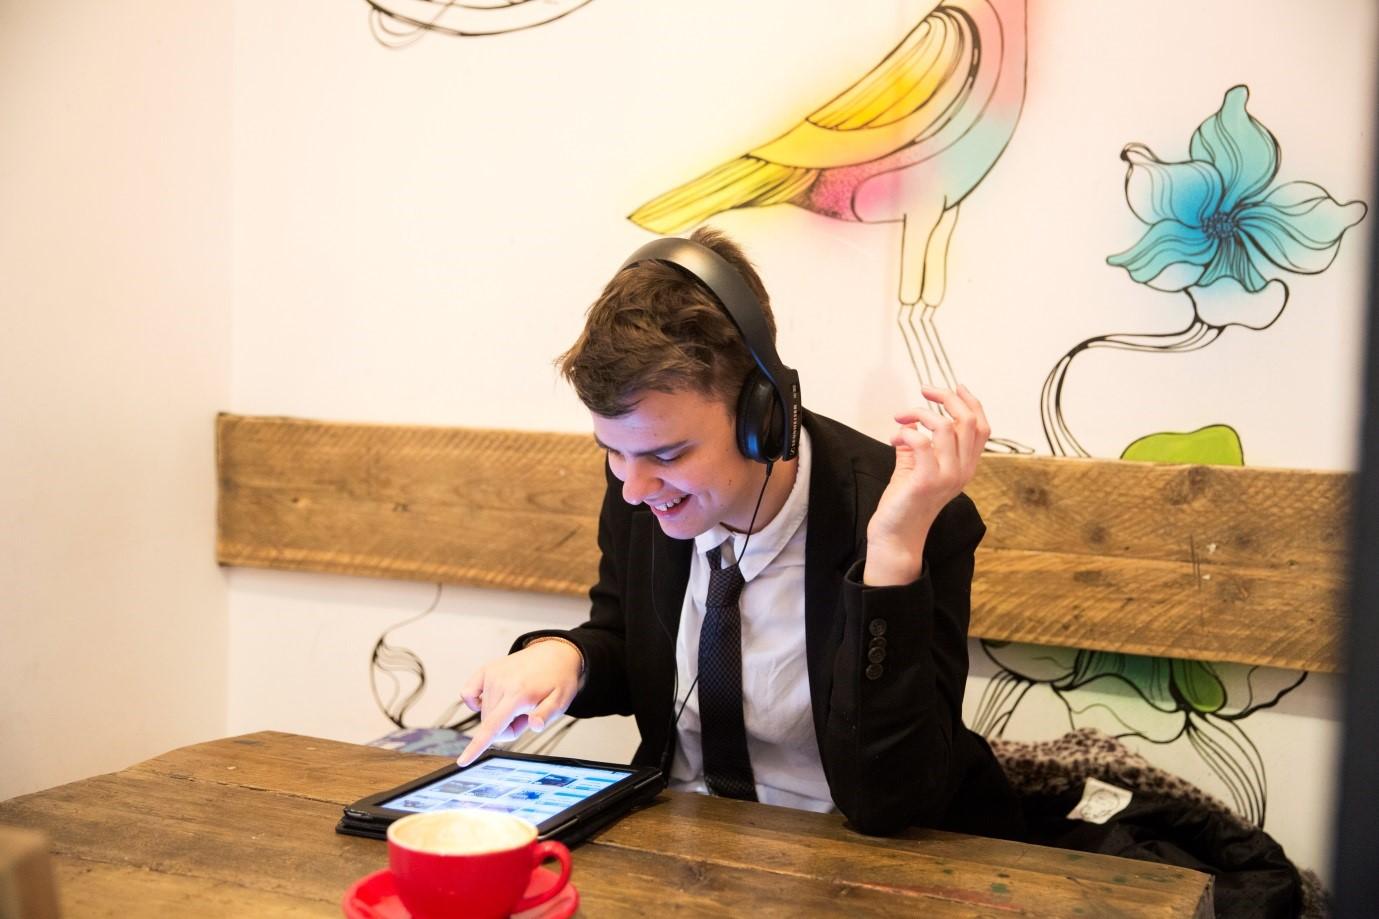 a laughing school boy in uniform, sat at a table with coffee cup using his iPad wearing headphones. There a decorative mural on the wall behind him.